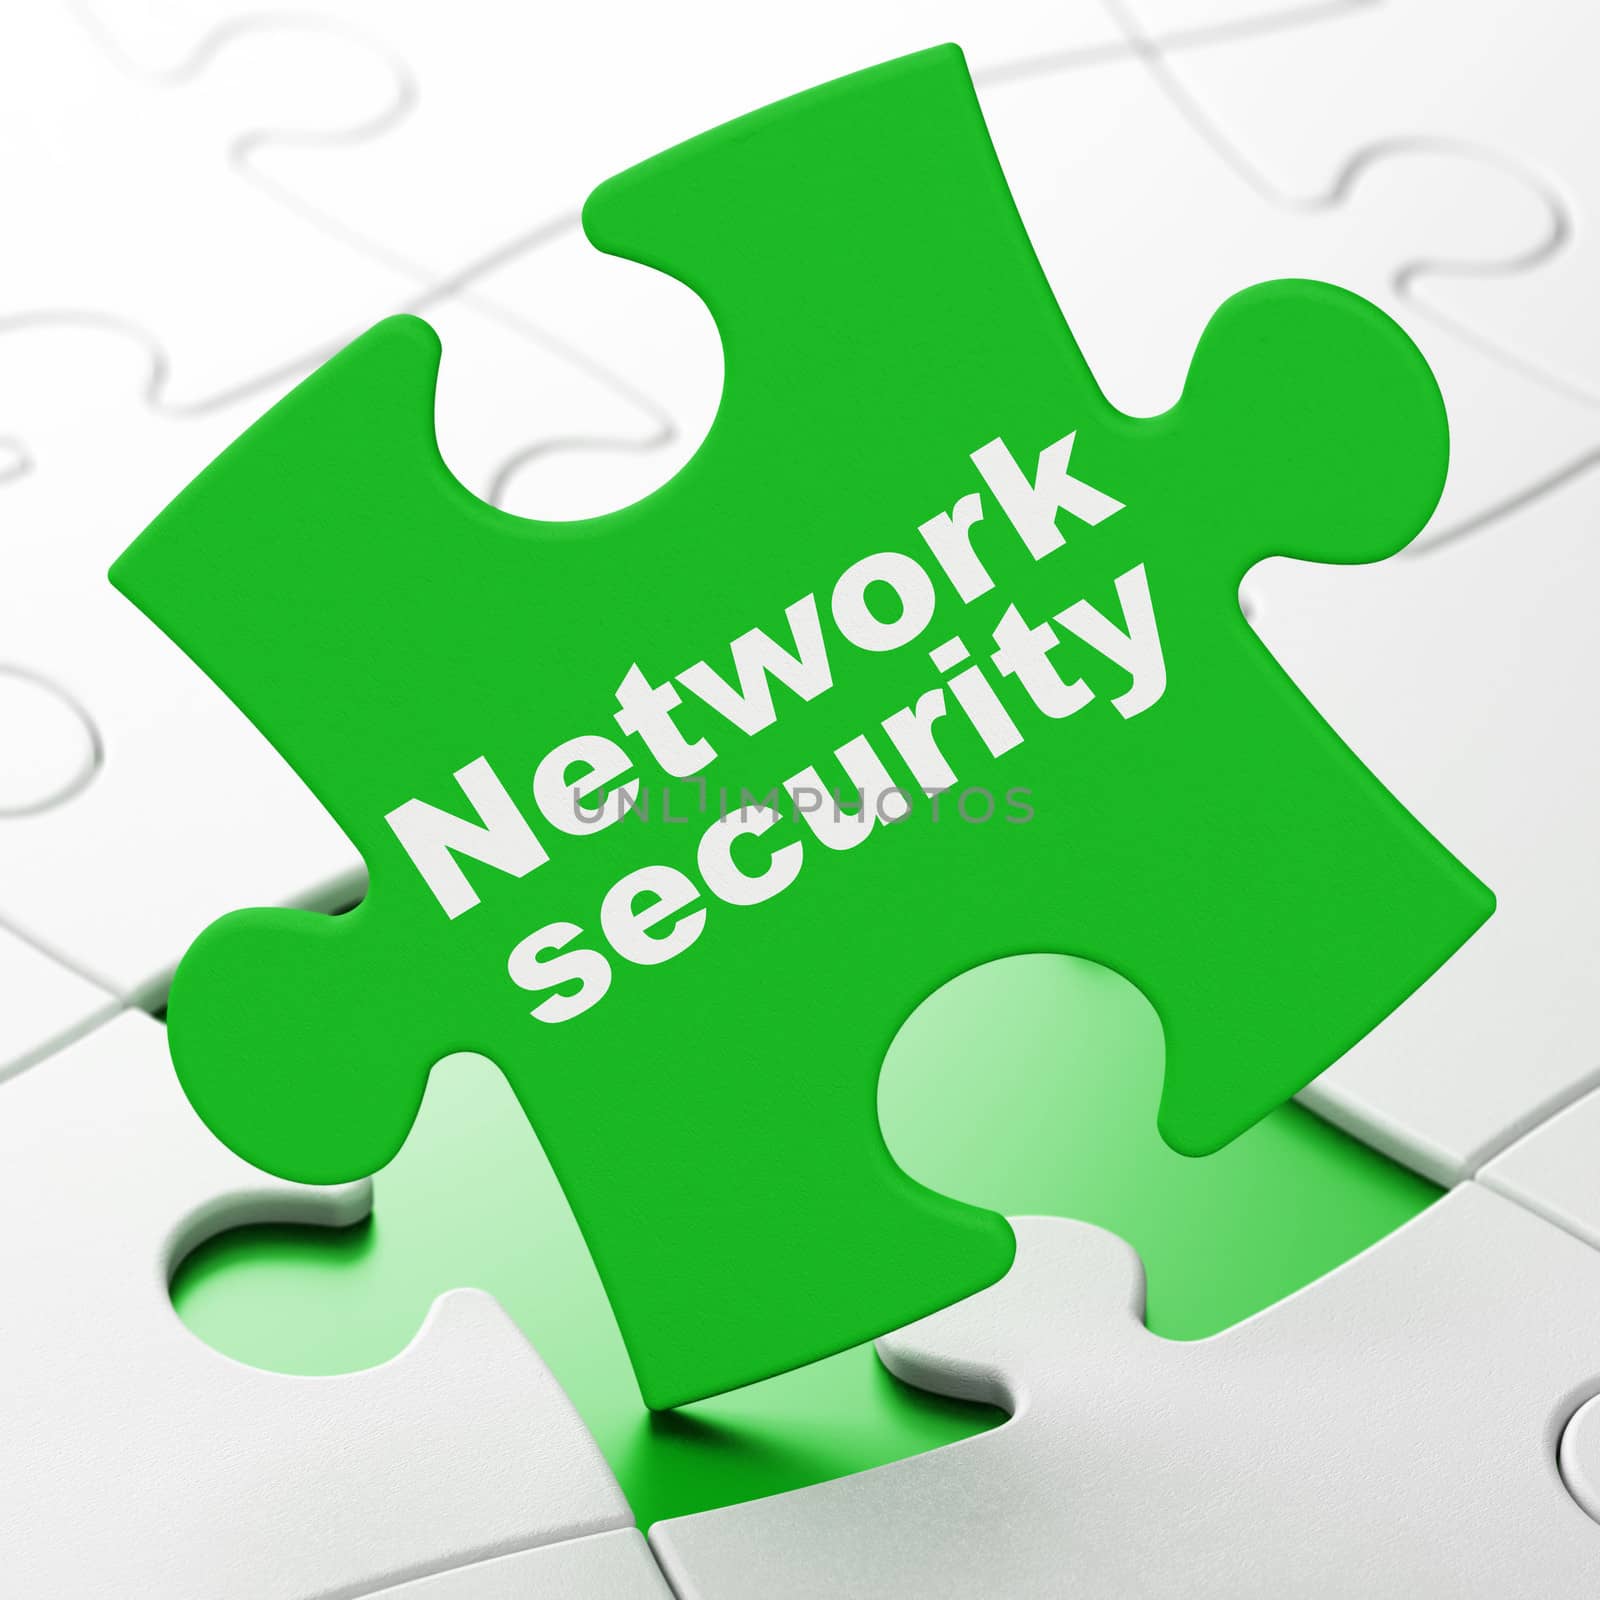 Safety concept: Network Security on puzzle background by maxkabakov